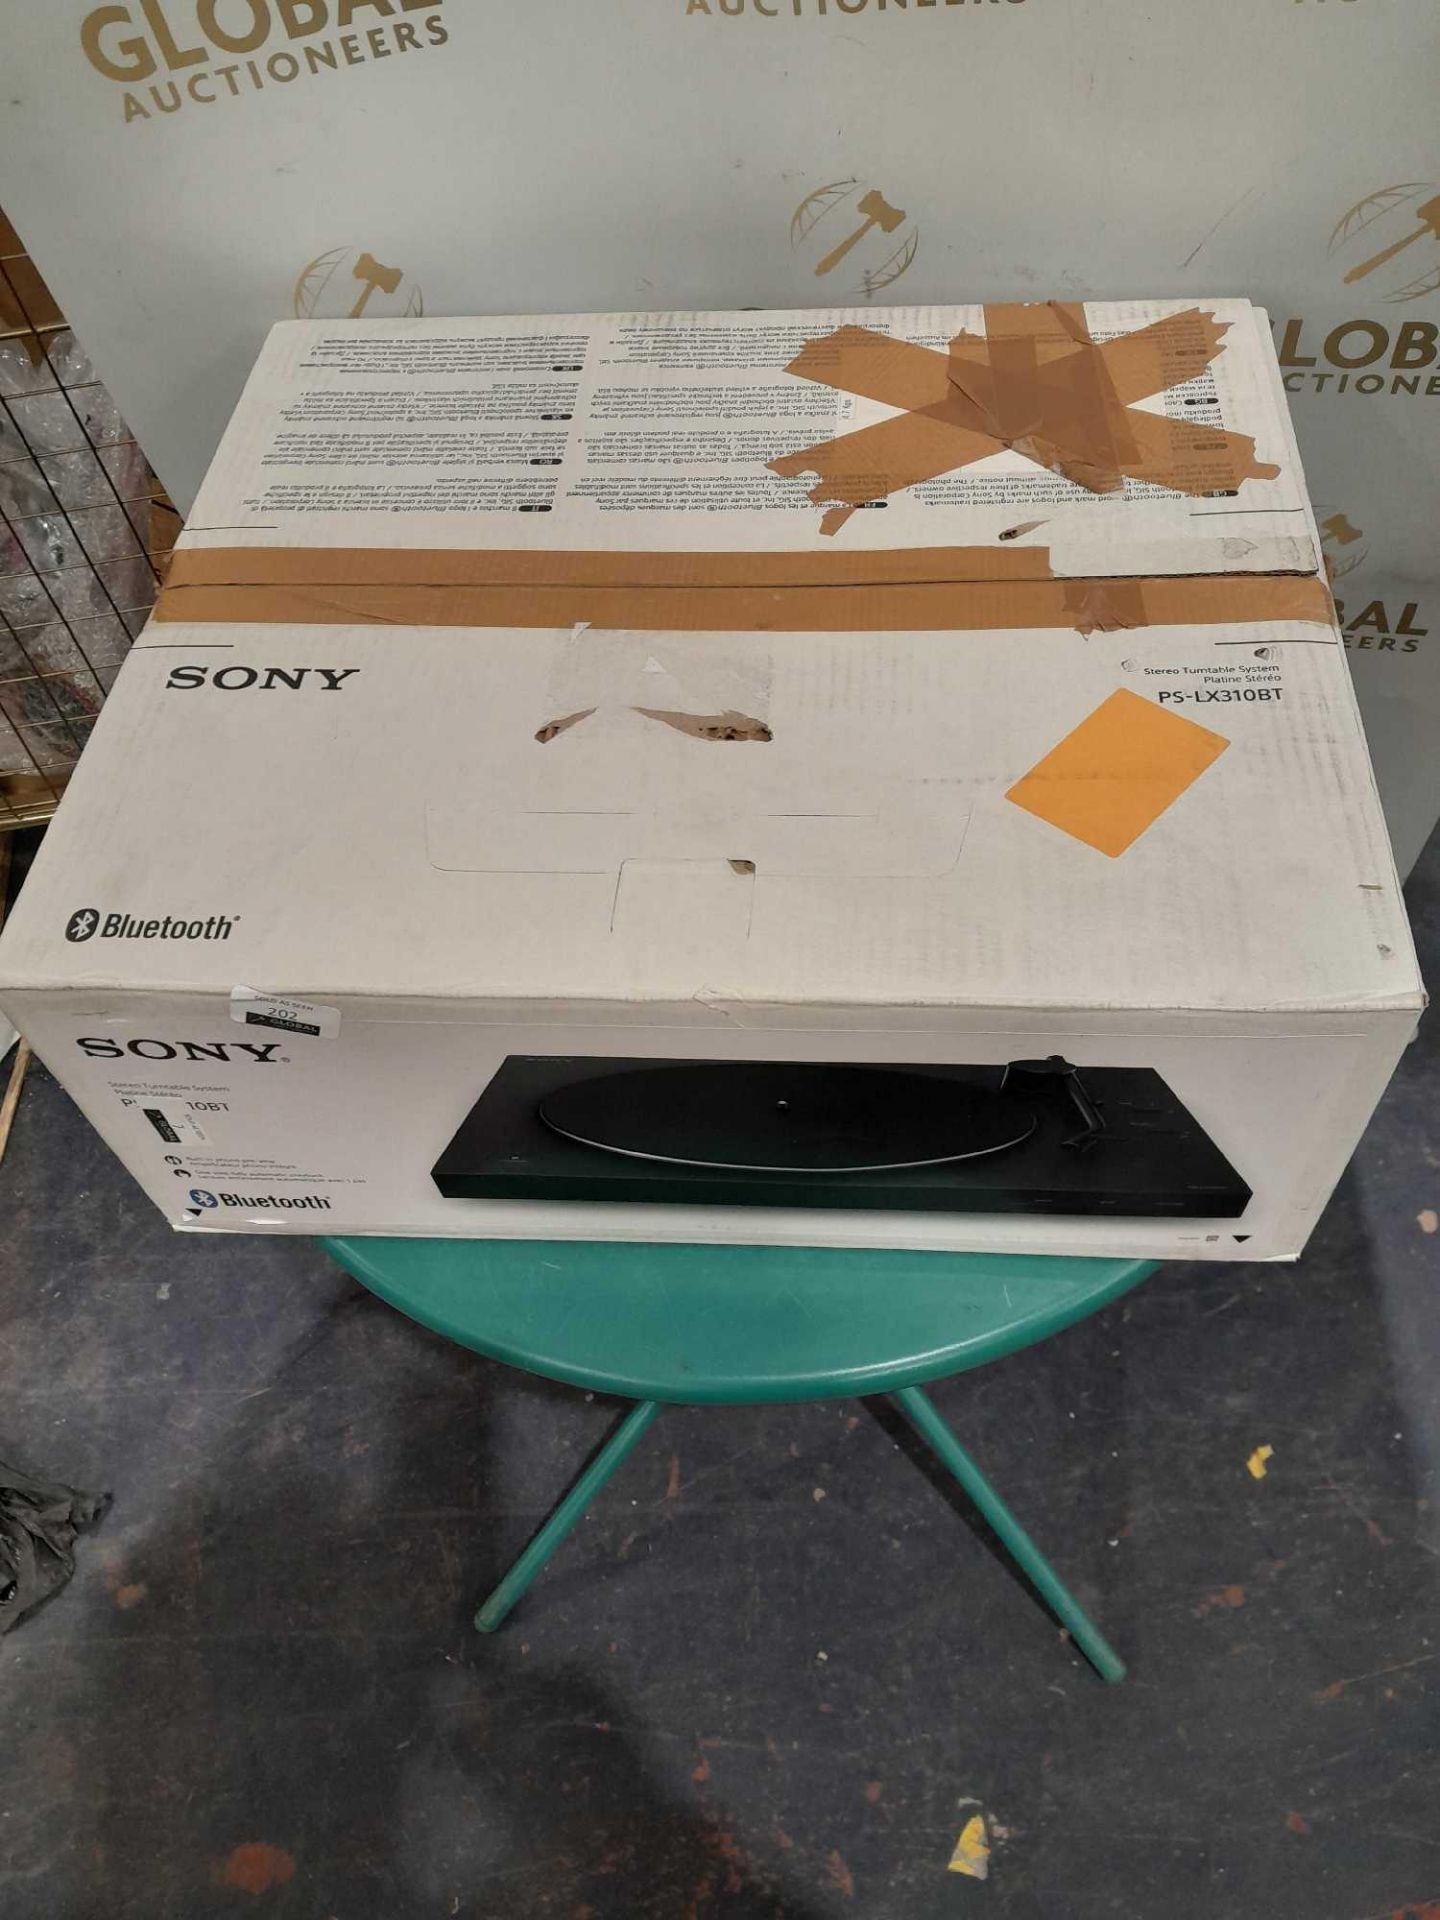 RRP £230 Boxed Sony Stereo Turntable Ps-Lx310Bt (Untested) (Resealed) (N) (Condition Reports - Image 2 of 2